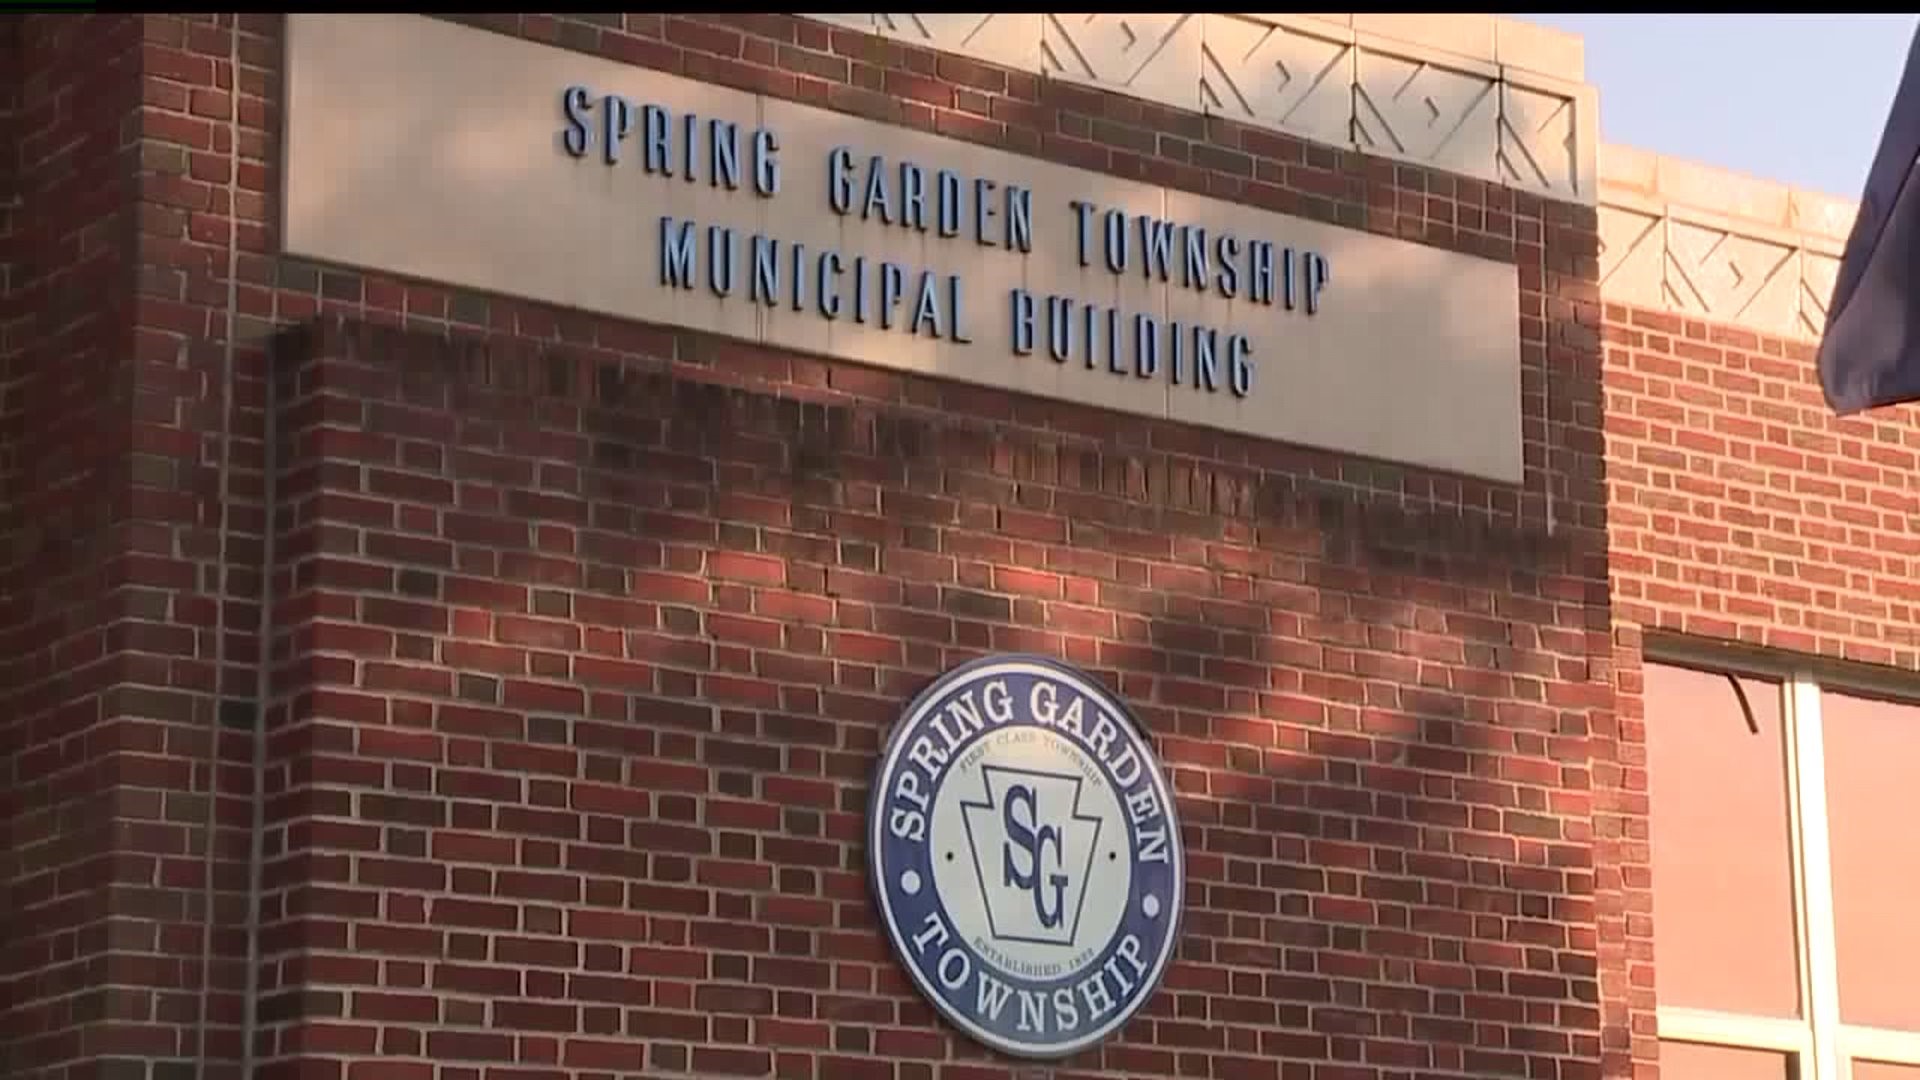 Proposed municipal center in Spring Garden Township rejected